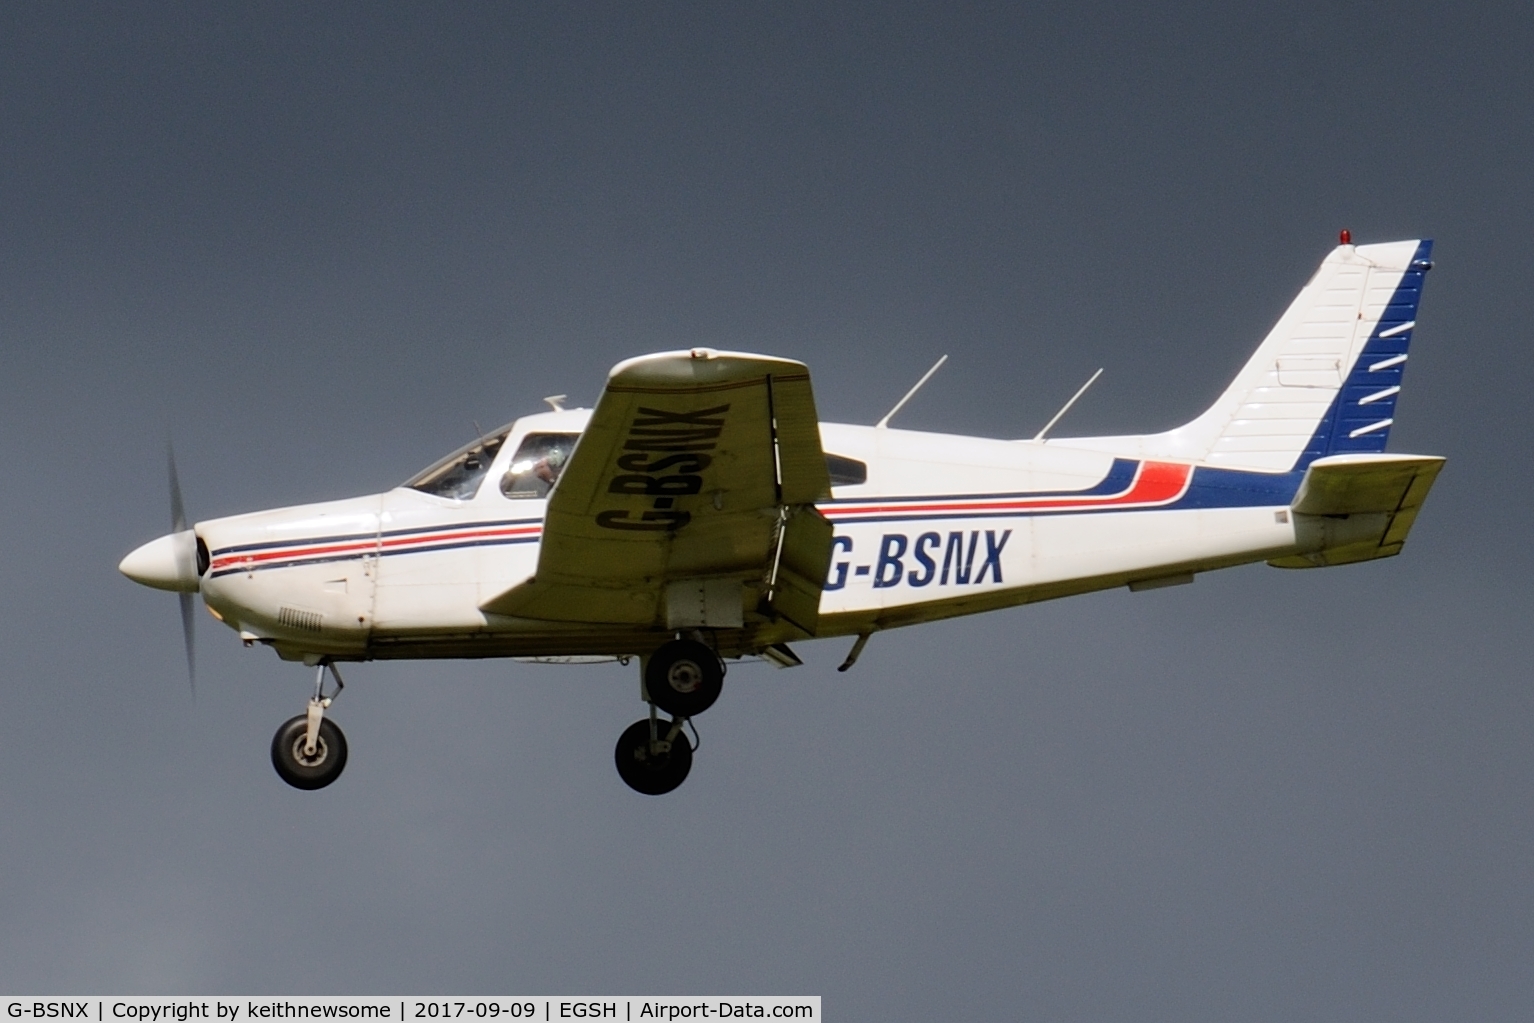 G-BSNX, 1979 Piper PA-28-181 Cherokee Archer II C/N 28-7990311, Arriving in changeable weather.